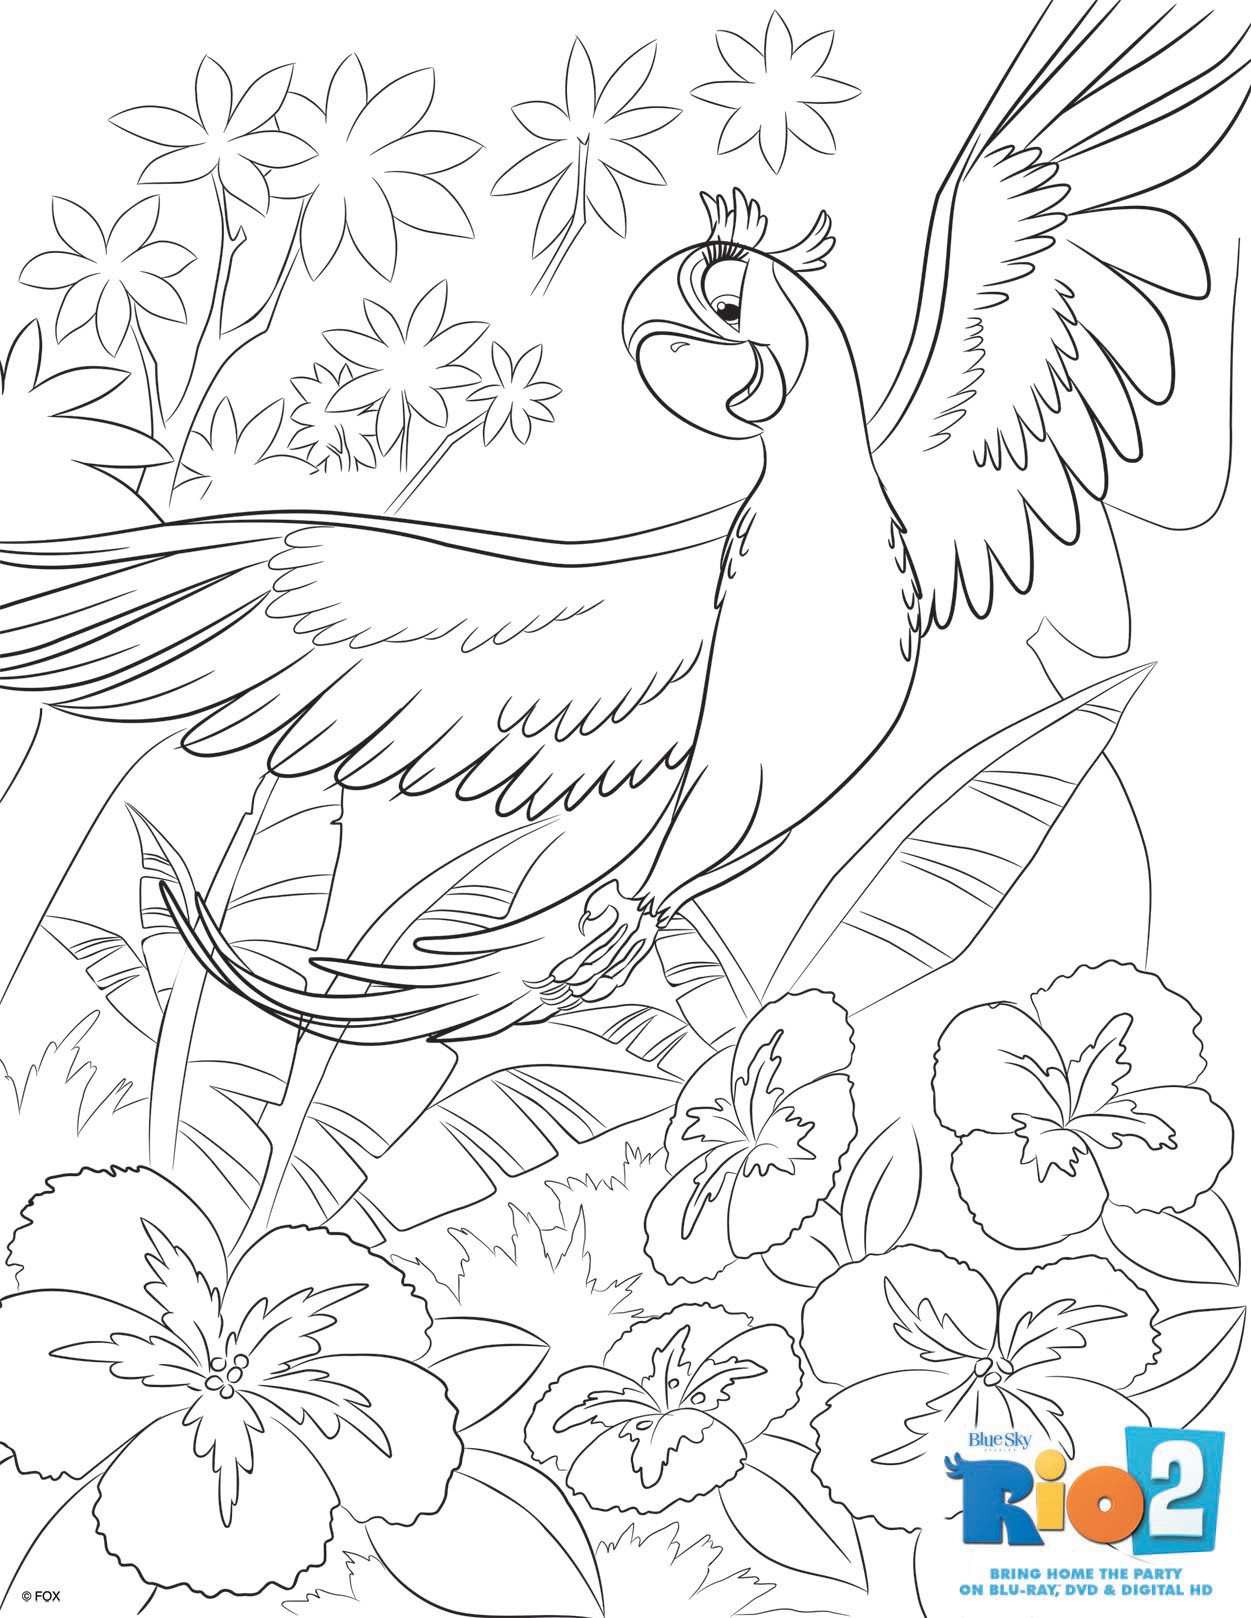 Rio 2 coloring pages